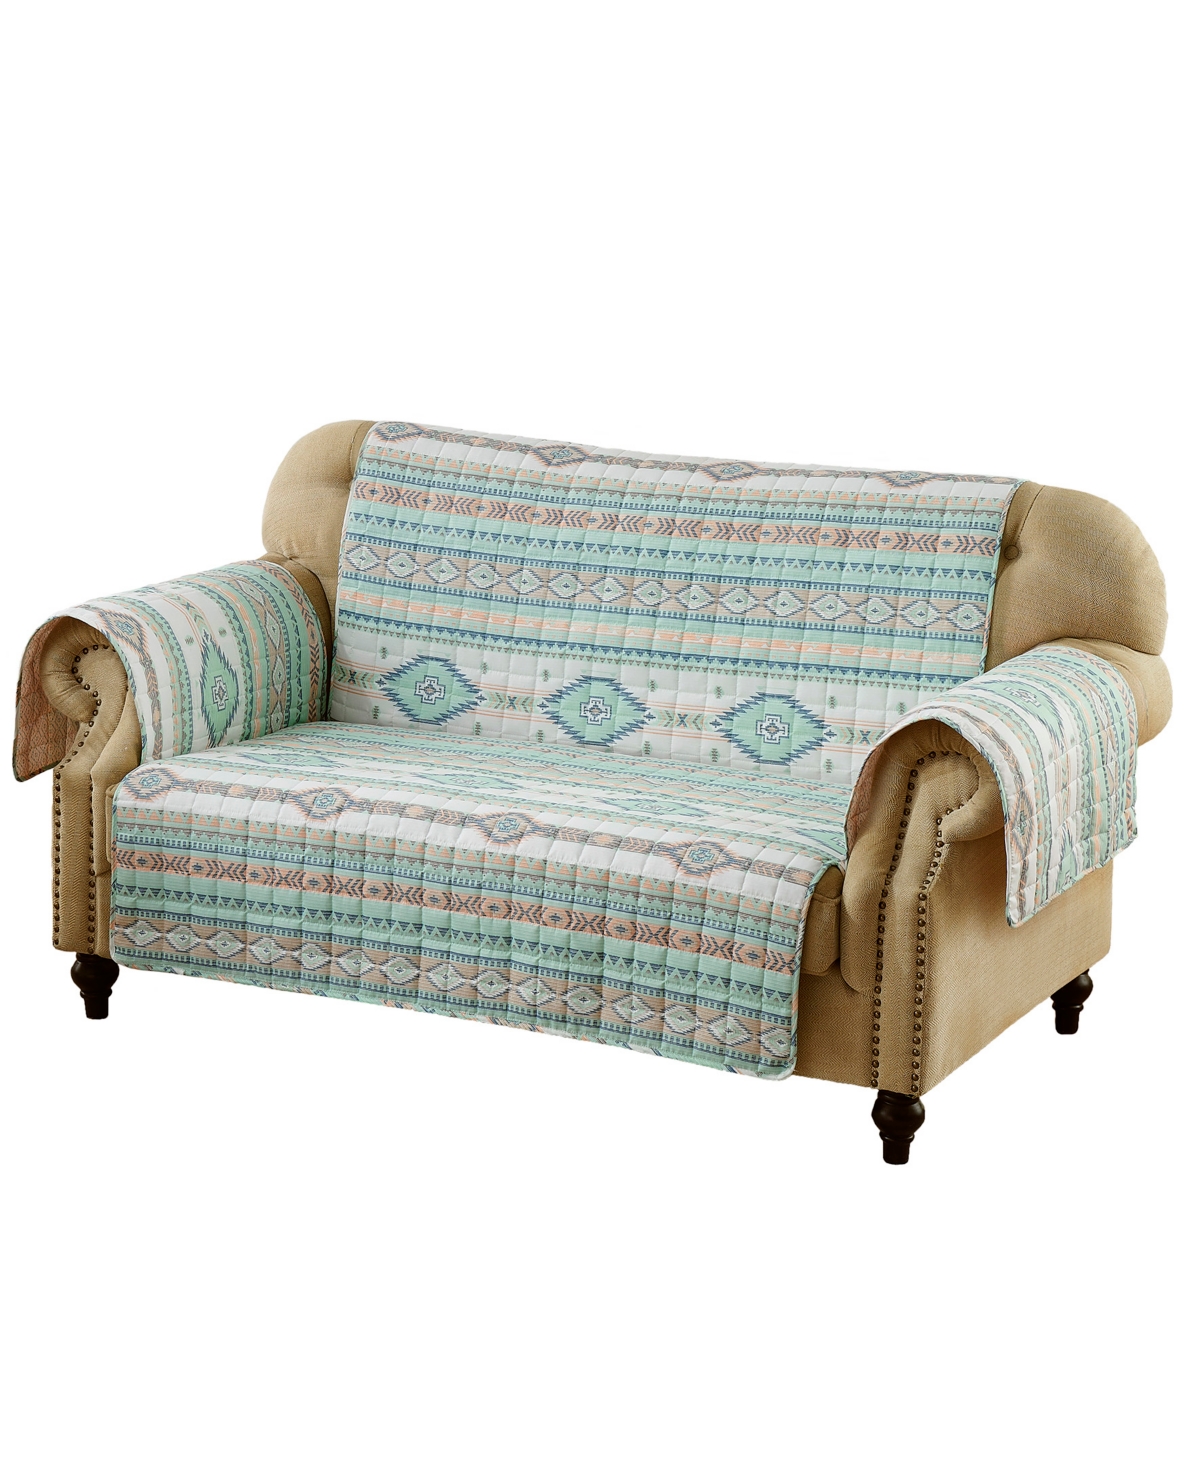 Shop Greenland Home Fashions Barefoot Bungalow Phoenix Furniture Protector, Loveseat In Turquoise